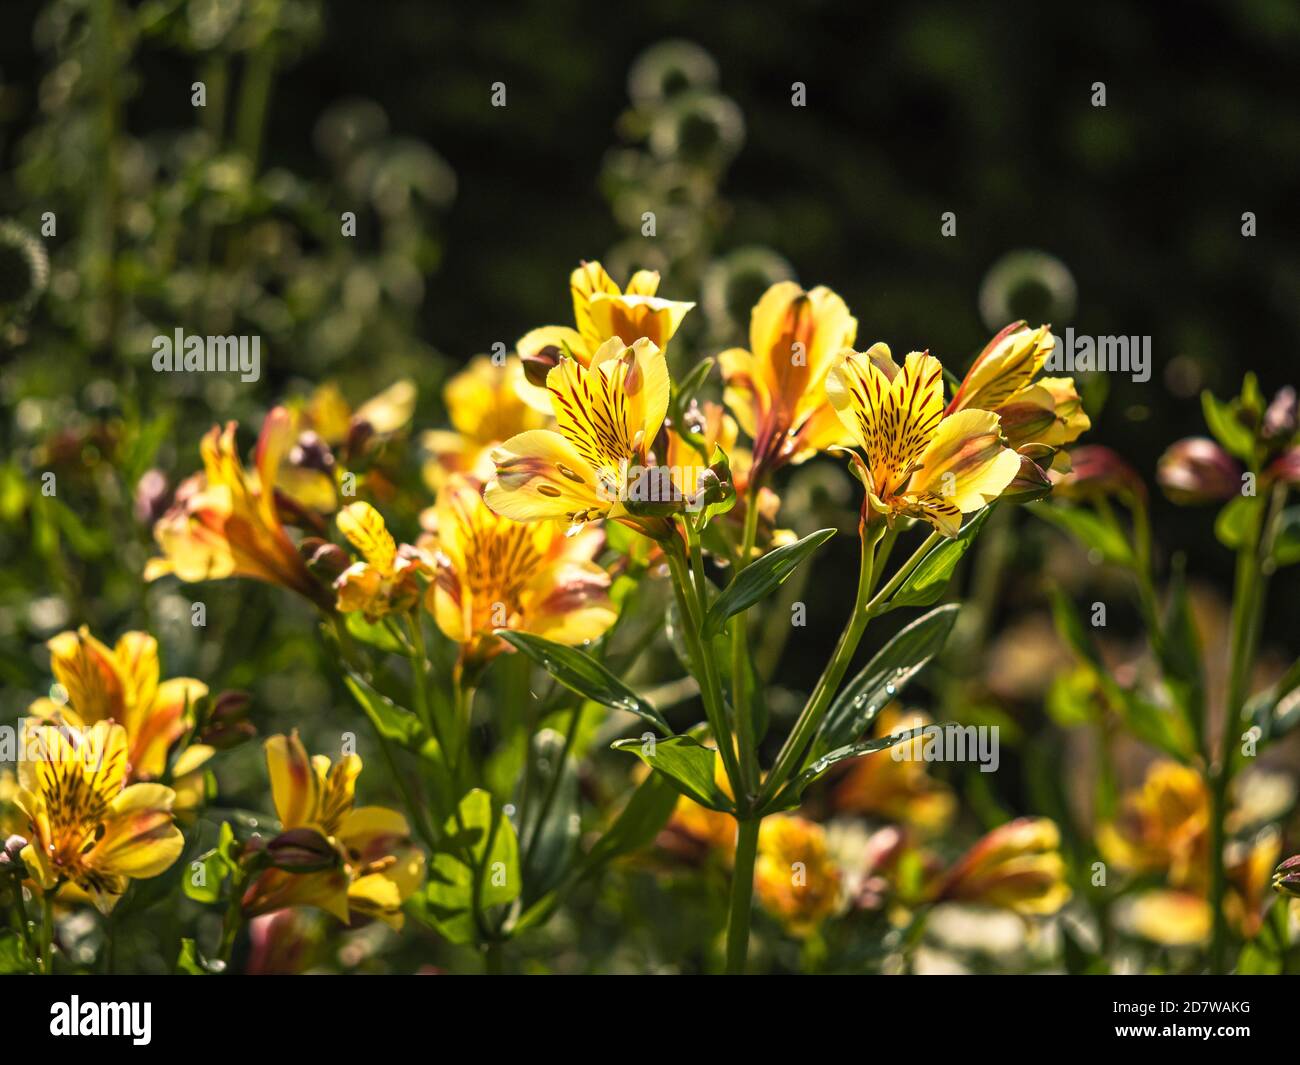 Pretty Alstroemeria Peruvian lily flowers in sunlight, also known as Lily of the Incas, variety Aimi Stock Photo